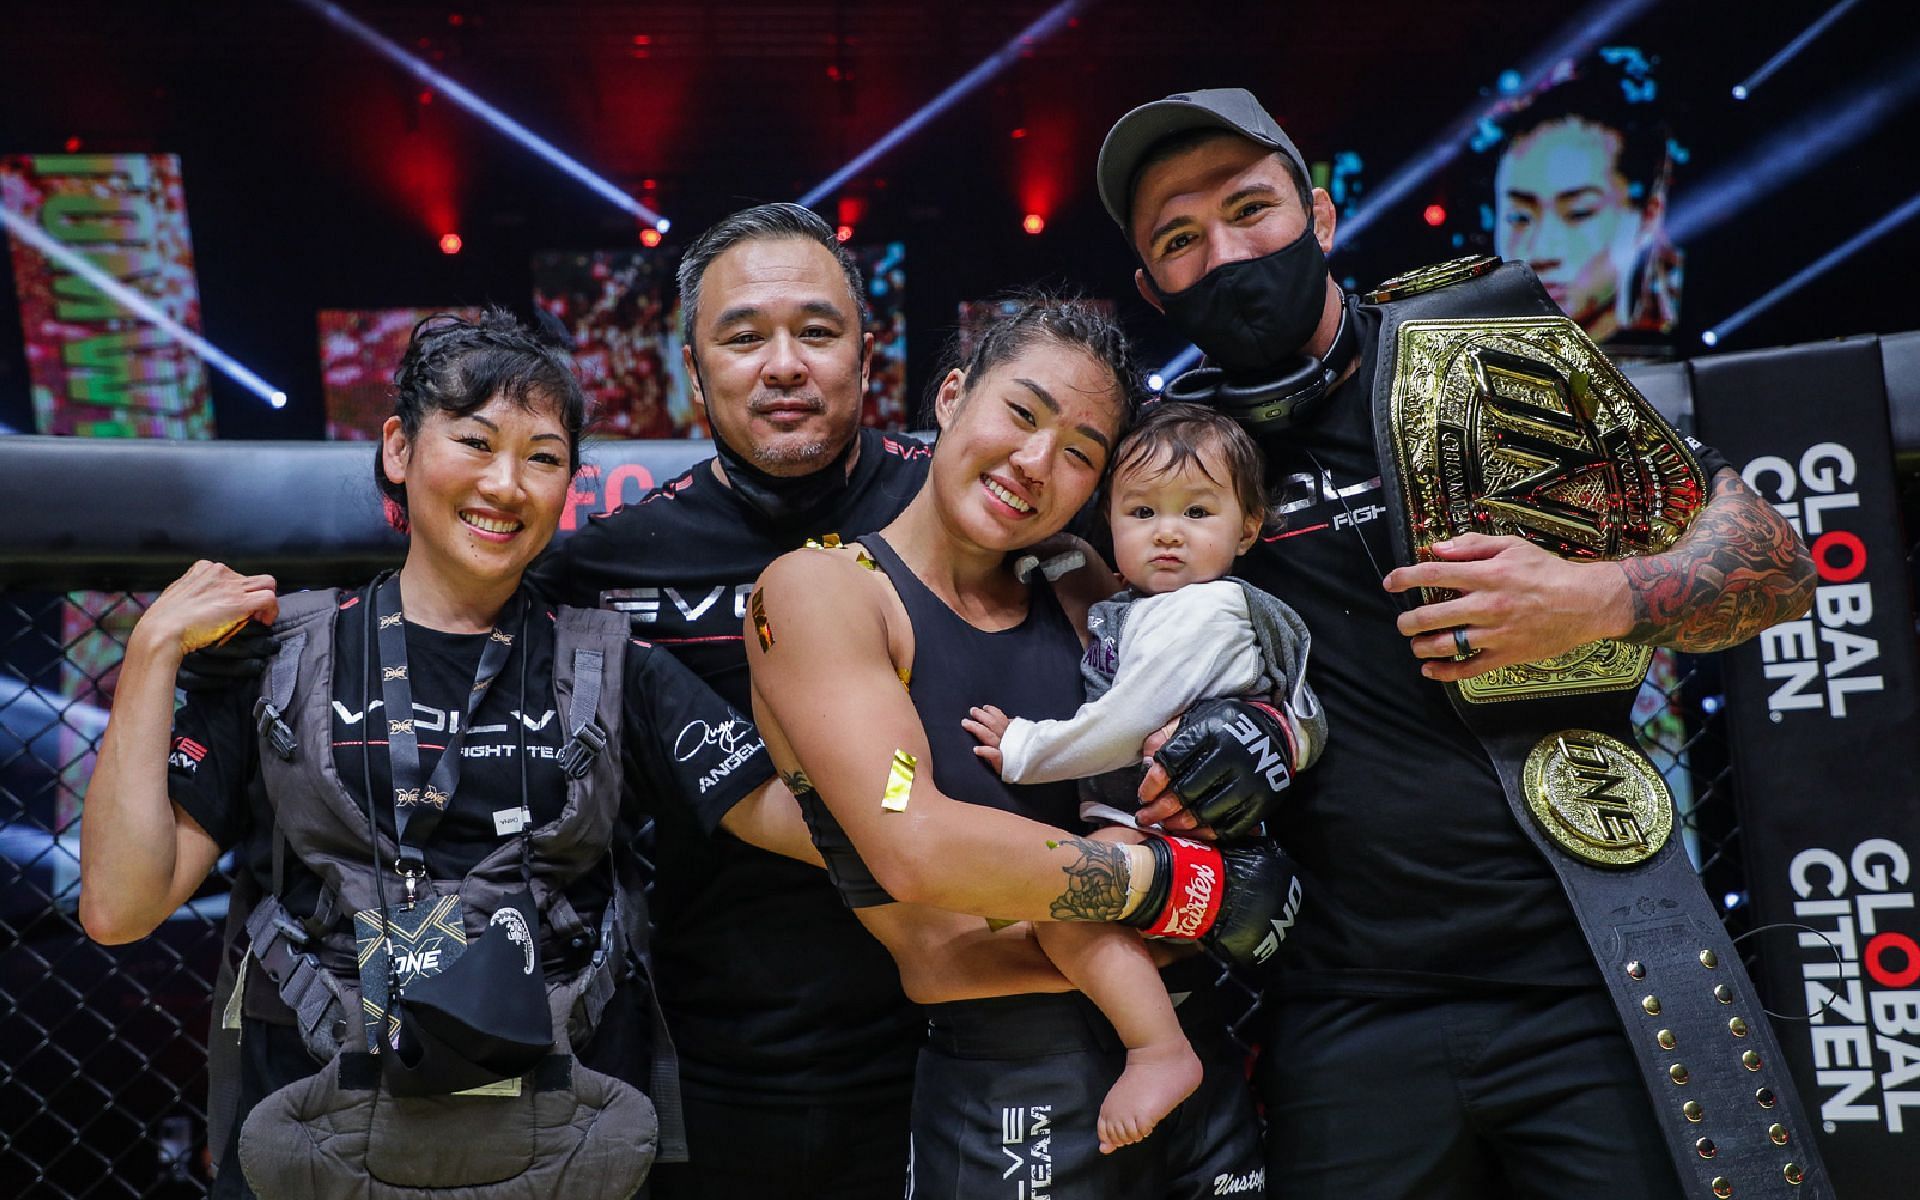 Angela Lee (center) celebrates with her parents Jewelz and Ken (left), her husband Bruno Pucci (right), and daughter Ava Marie at ONE X. [Photo ONE Championship]